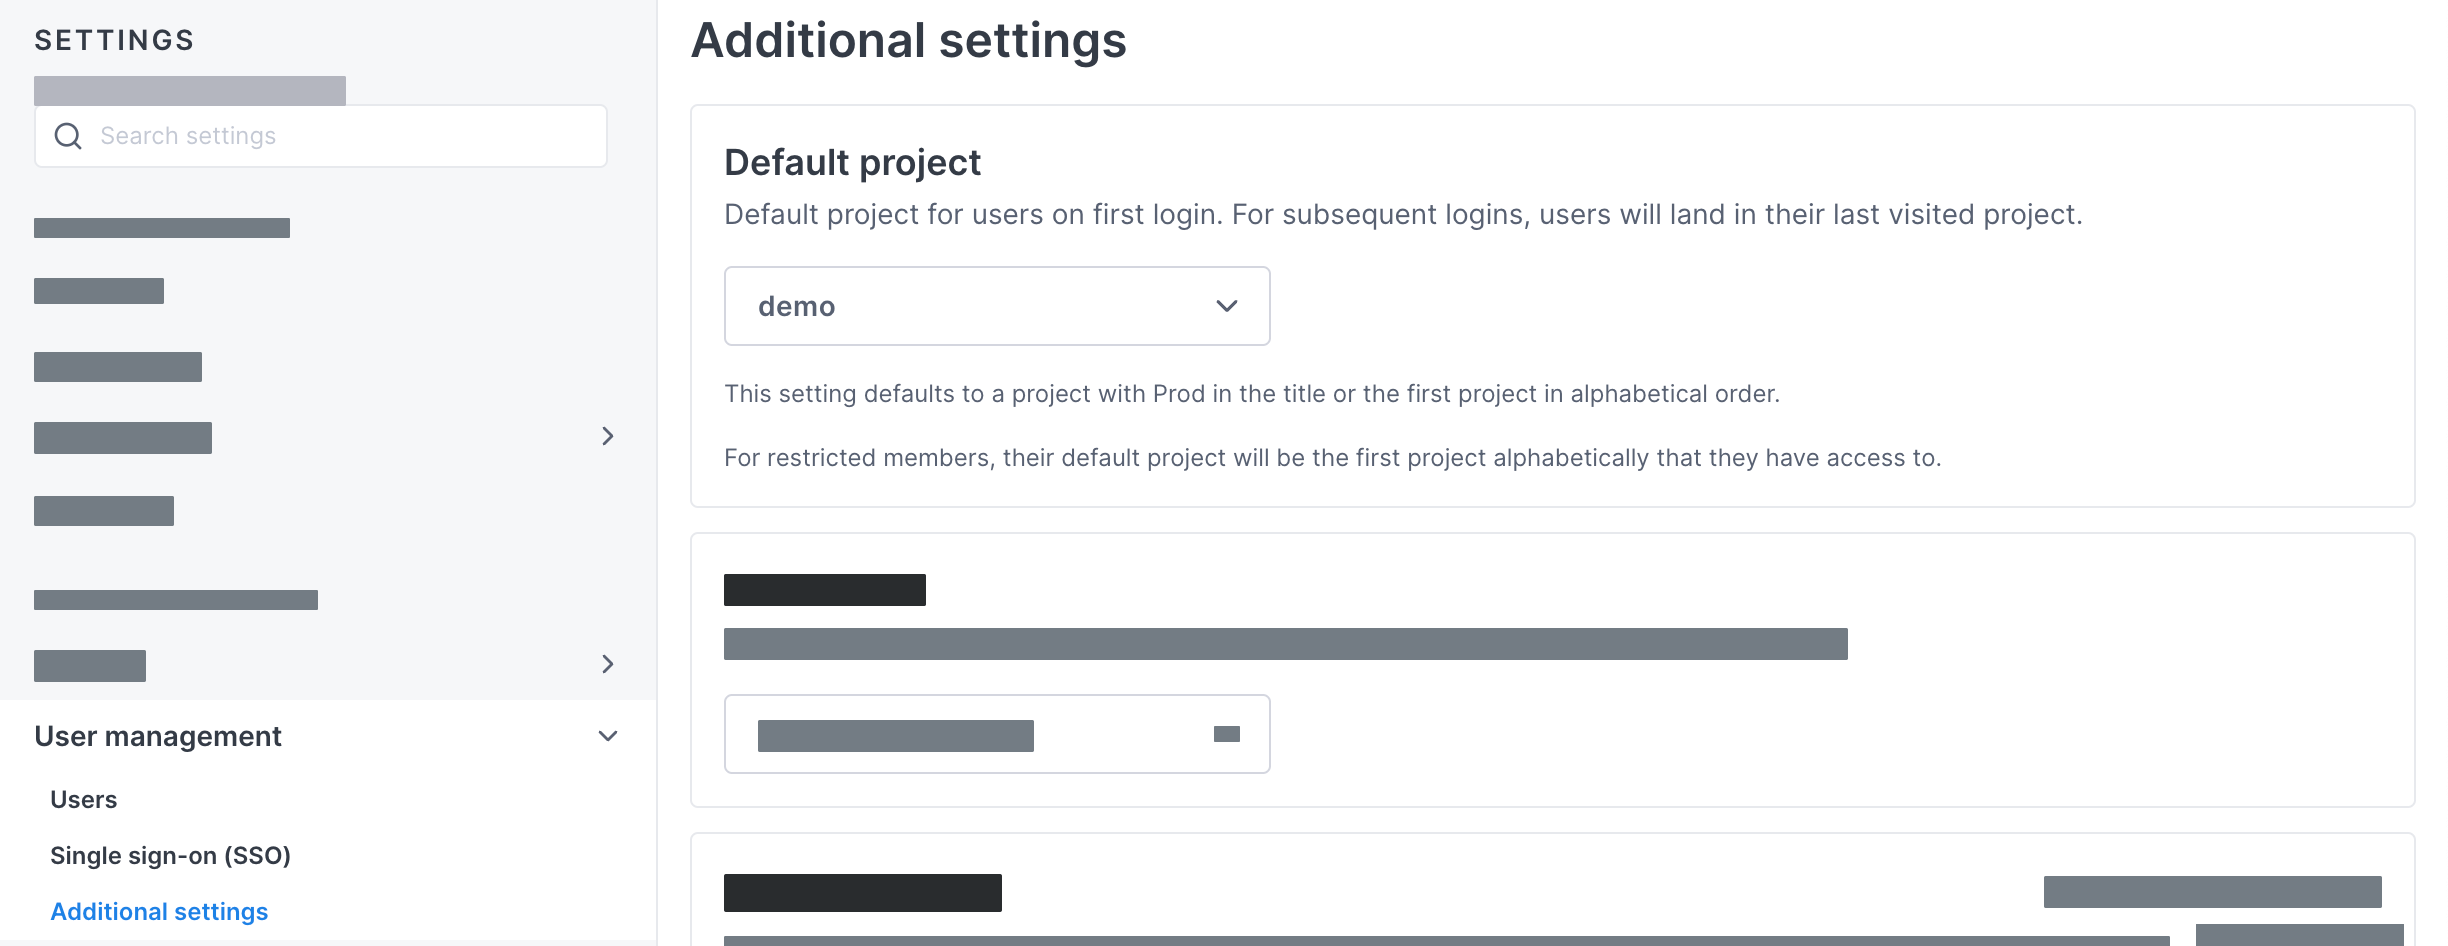 Set the default project for new users